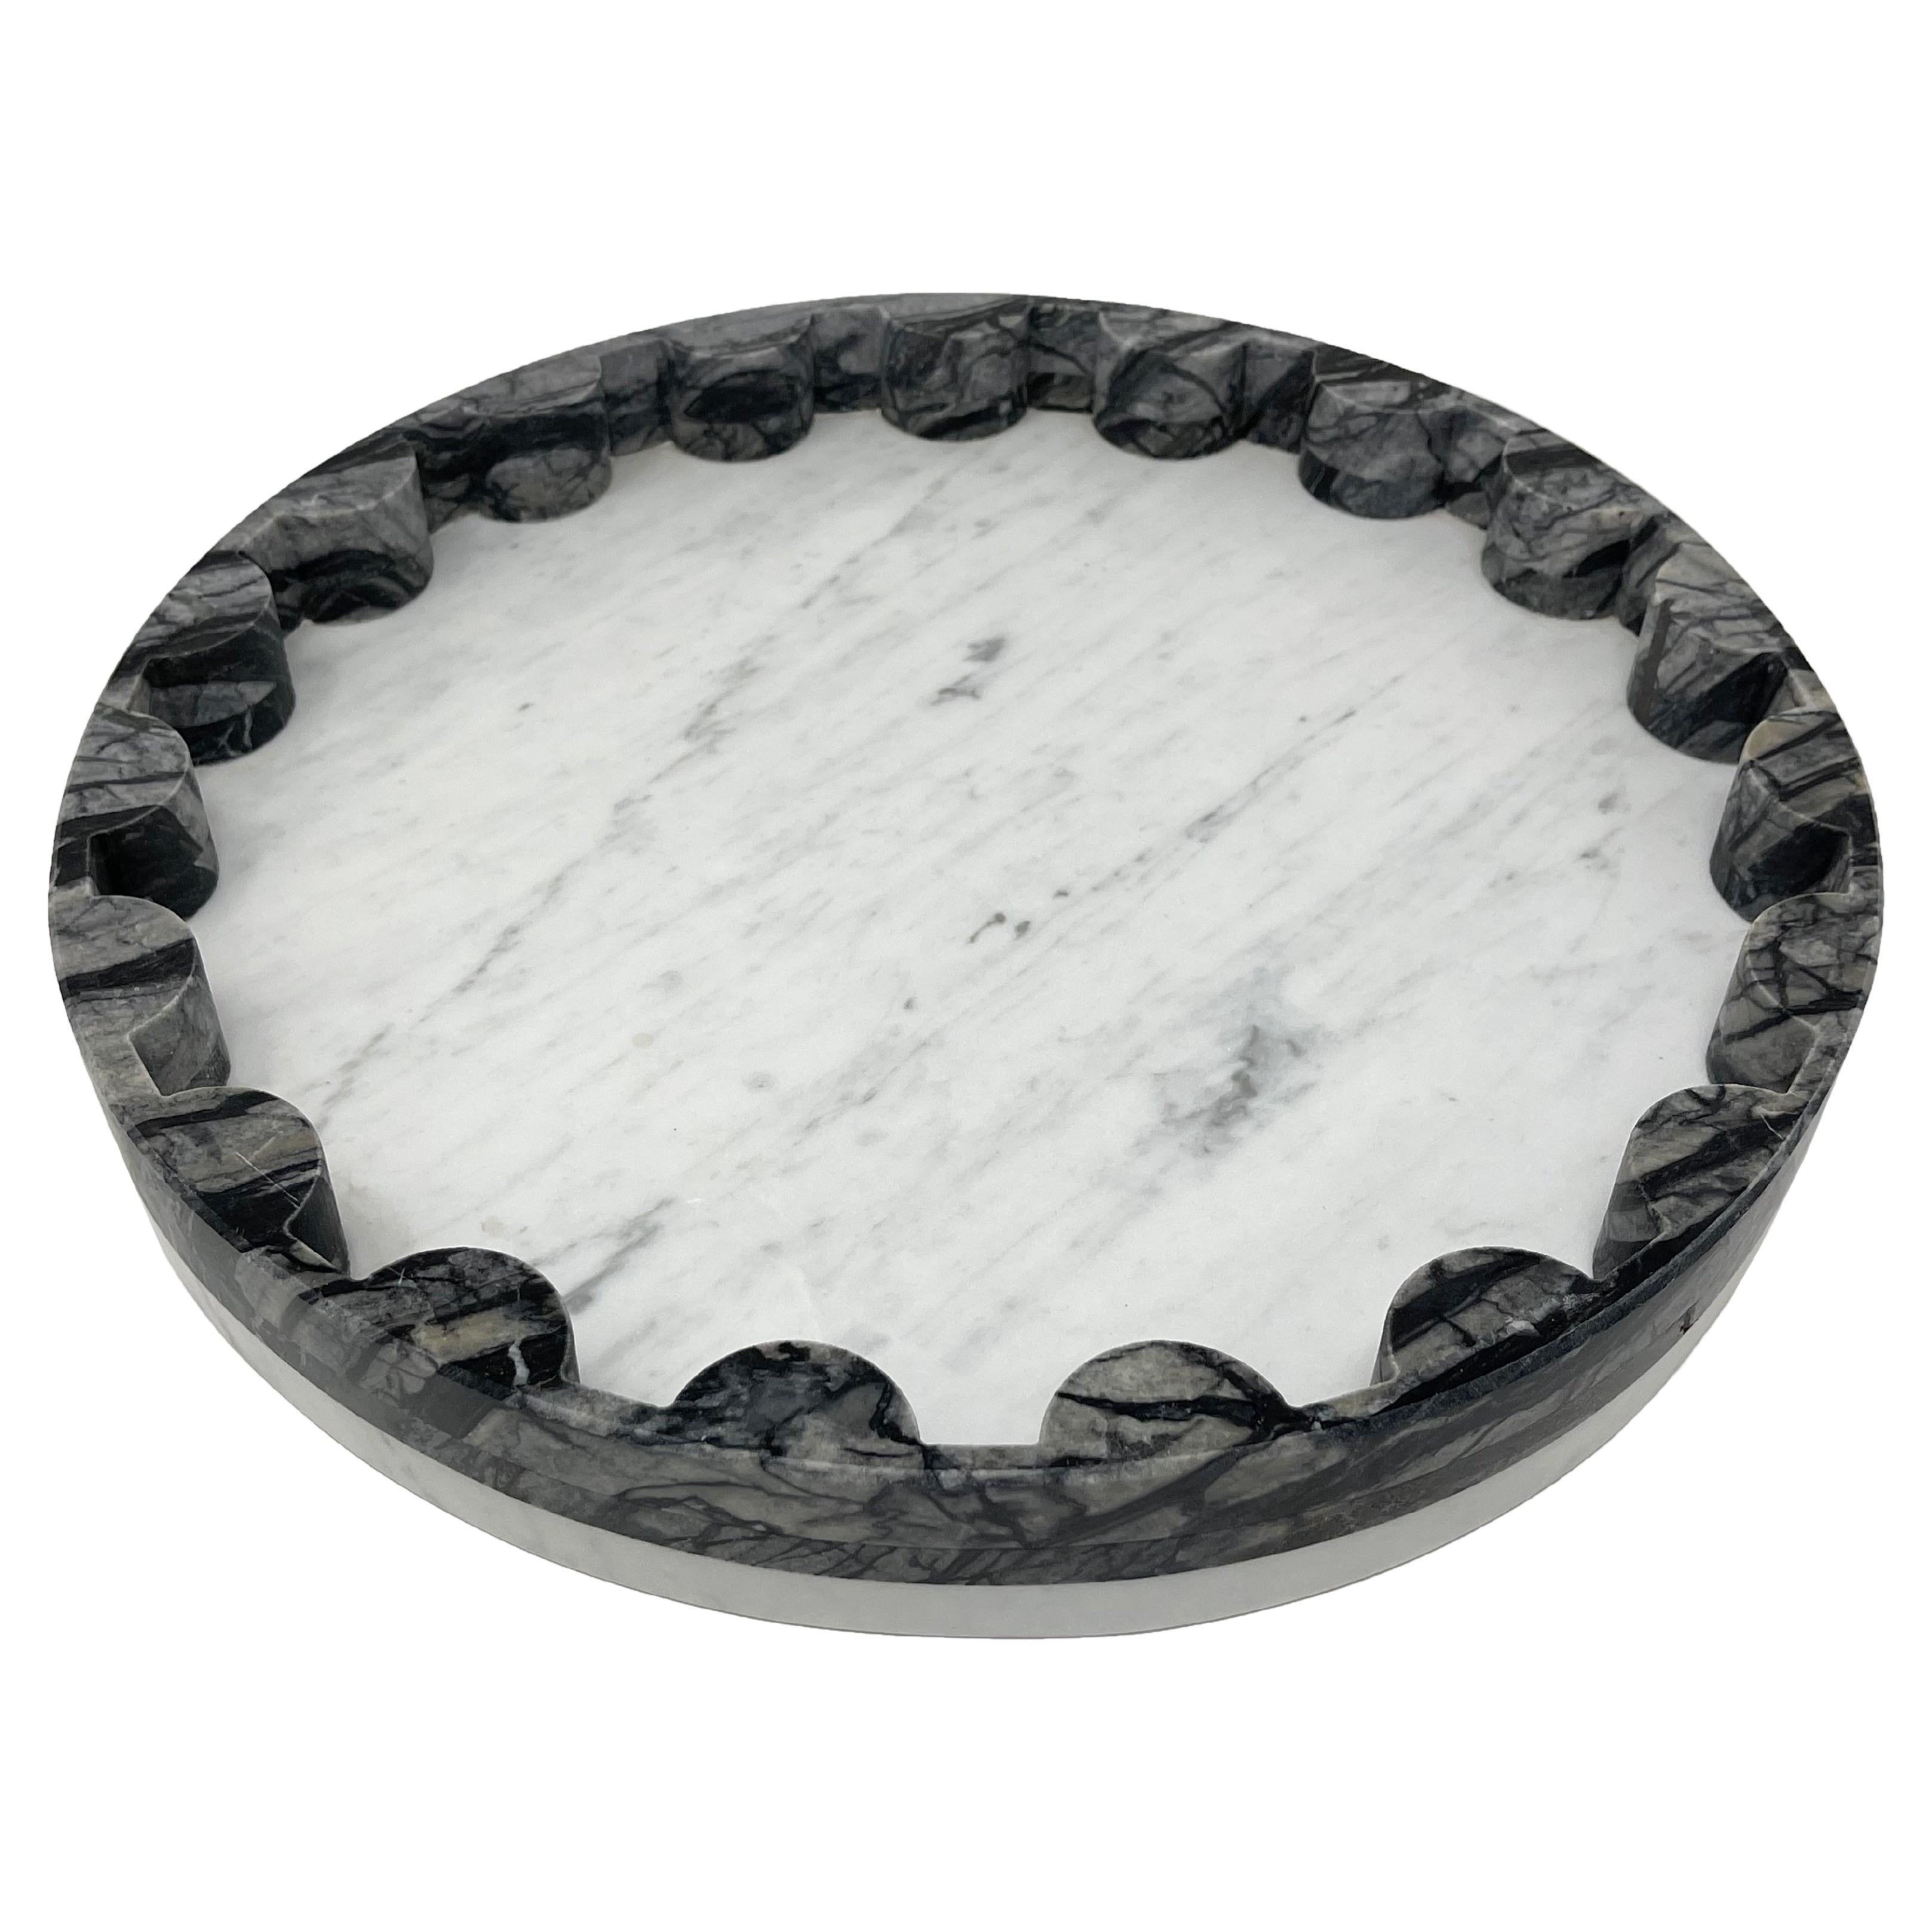 Onde 'Waves', 21st Century Carrara Marble Tray For Sale